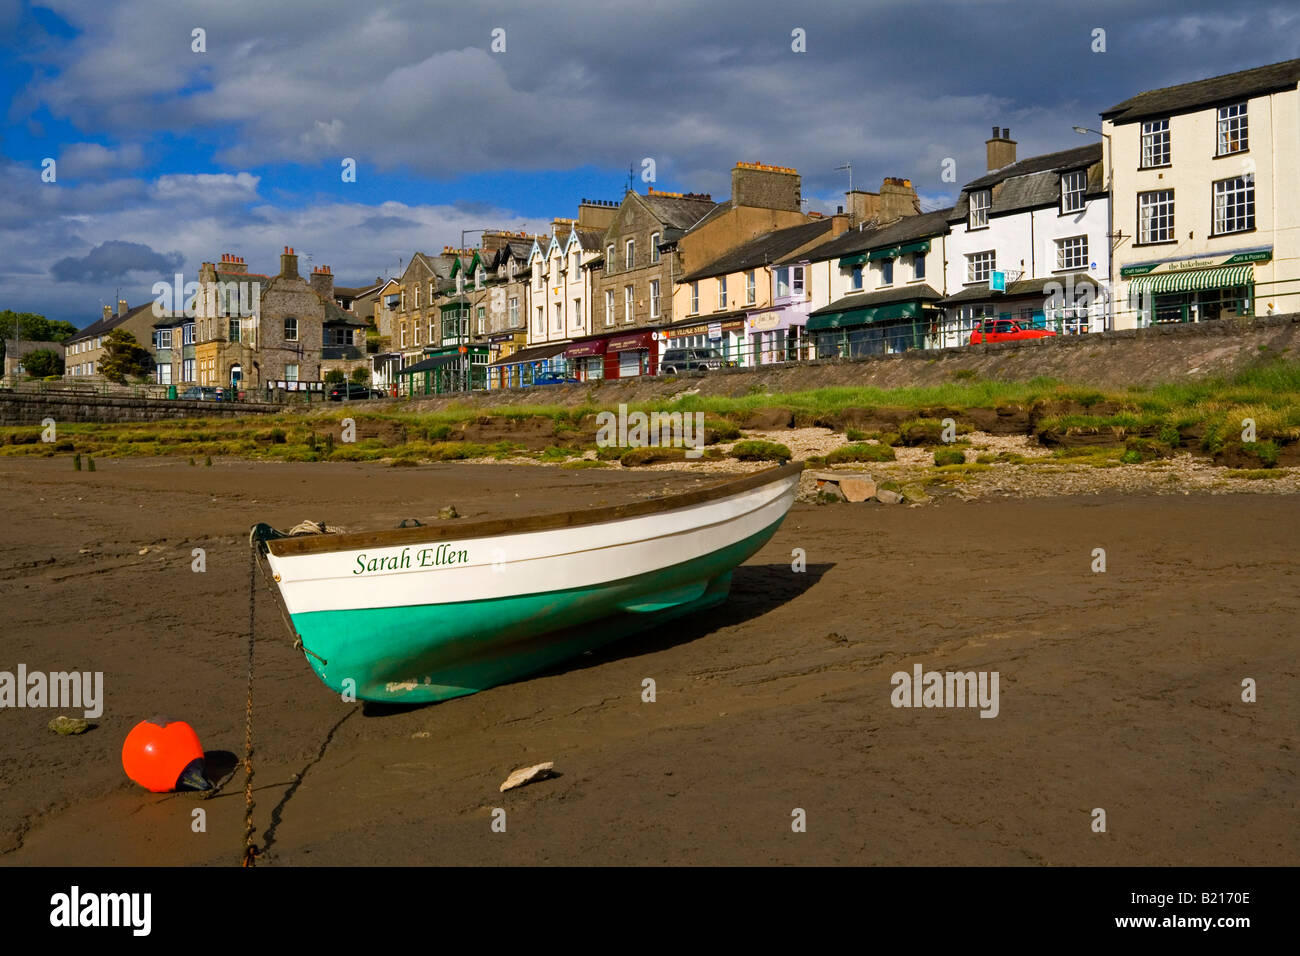 The beach at Arnside Cumbria on the River Kent Estuary Morecambe Bay England UK with boat in foreground Stock Photo